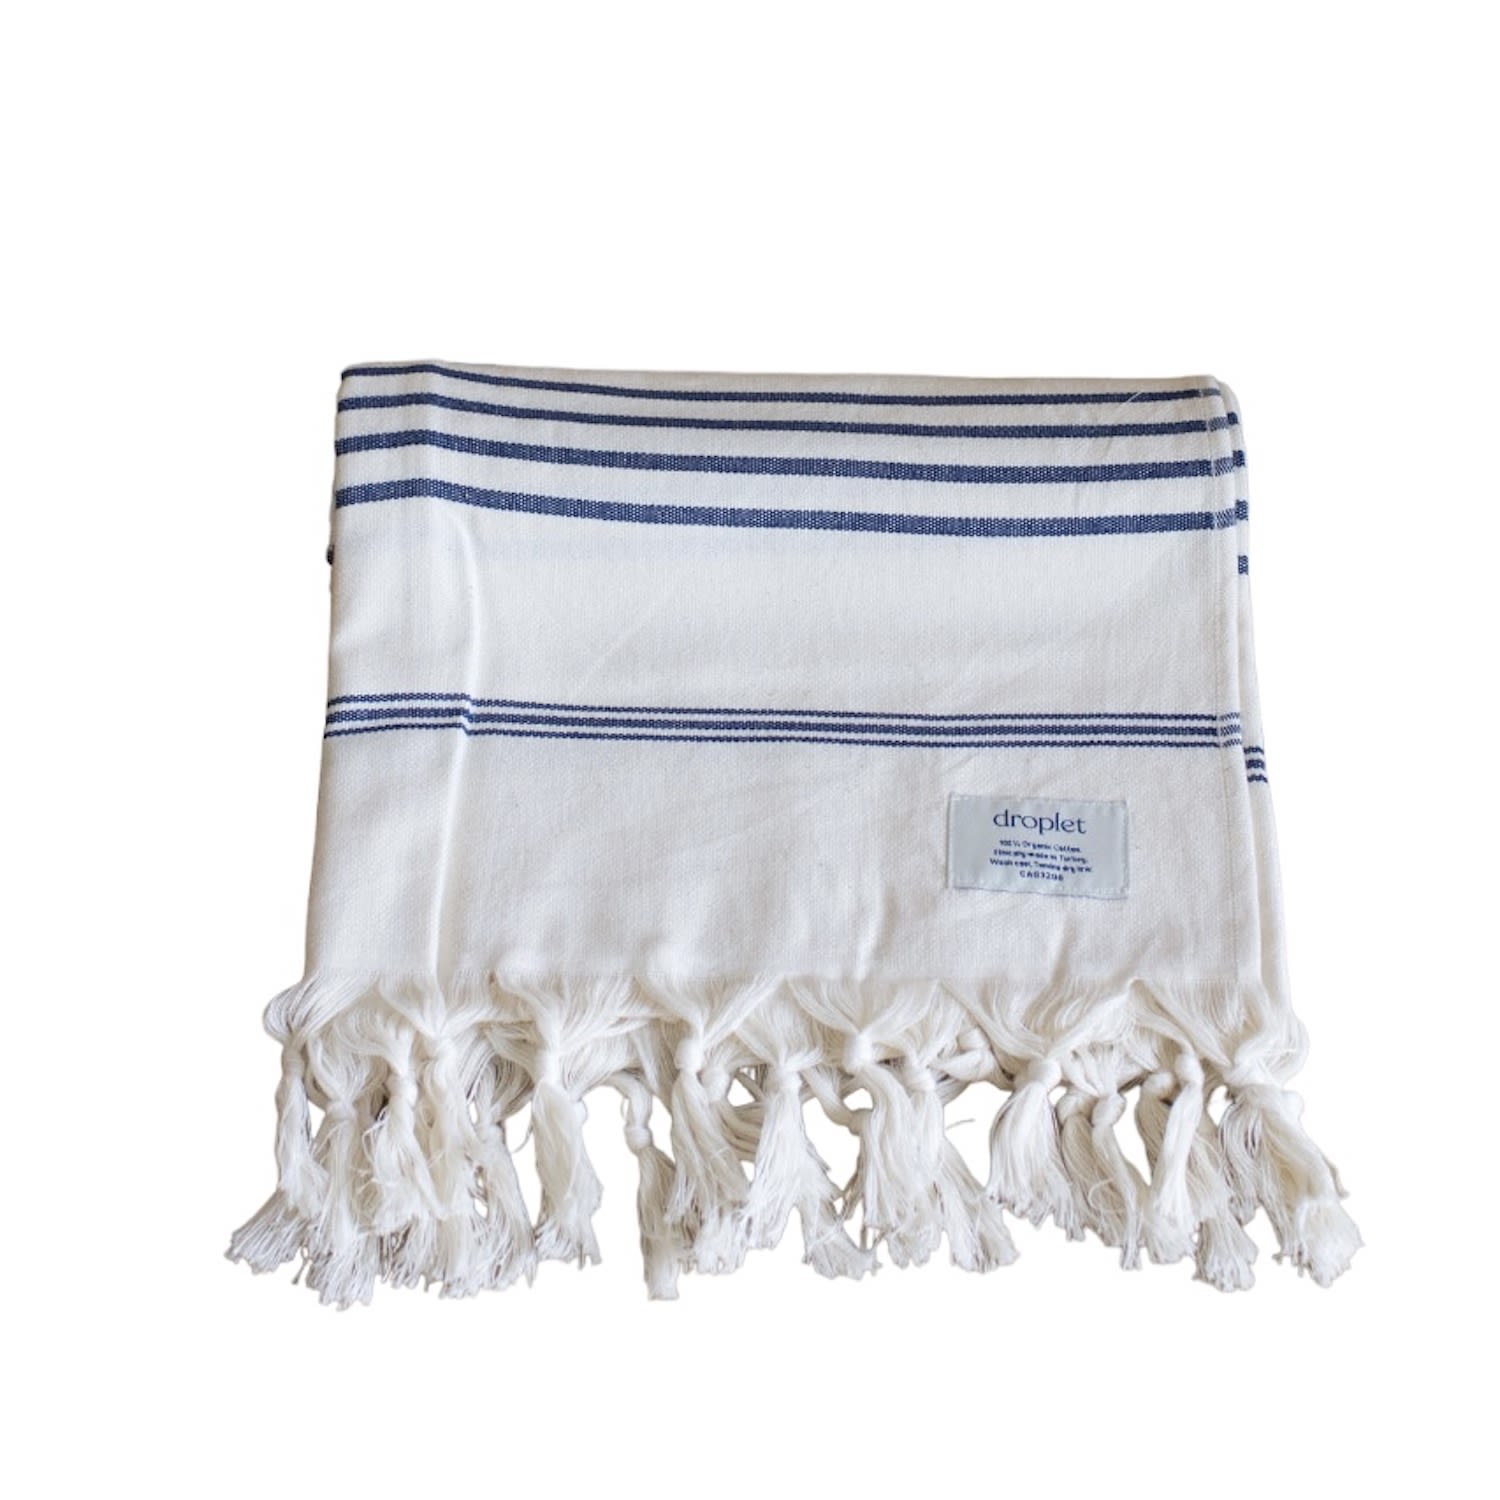 Blue Organic Cotton Turkish Bath Towels - Ocean One Size Droplet Home Goods